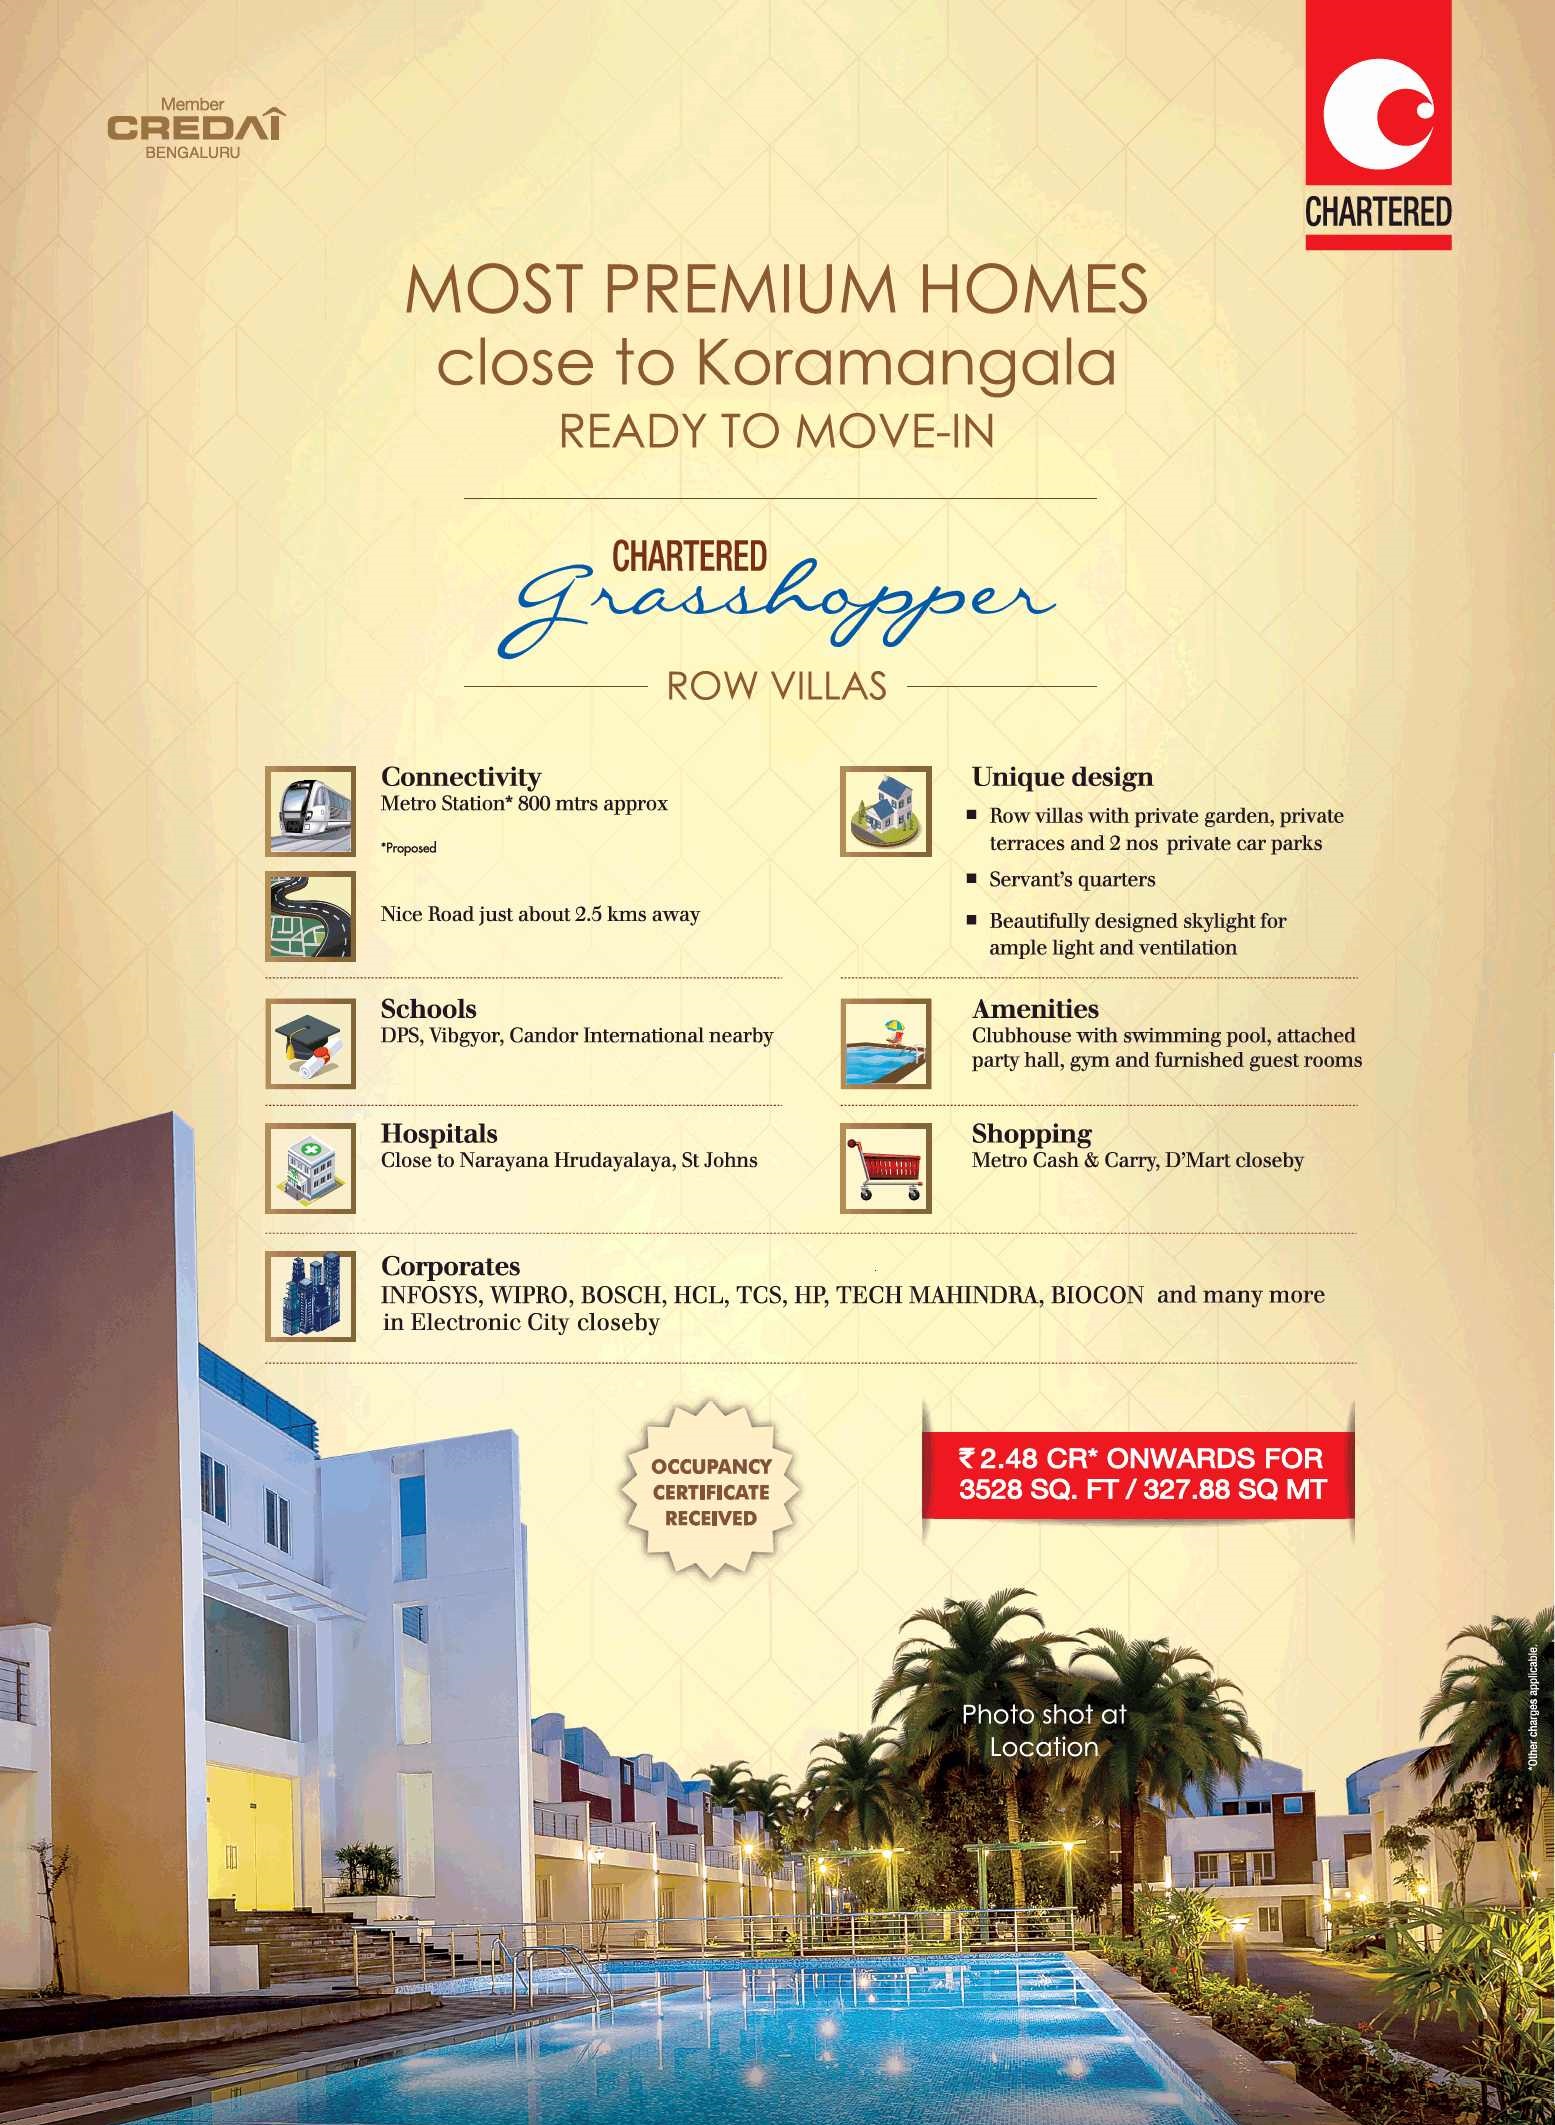 Occupancy certificate received for Chartered Grasshopper in Bangalore Update